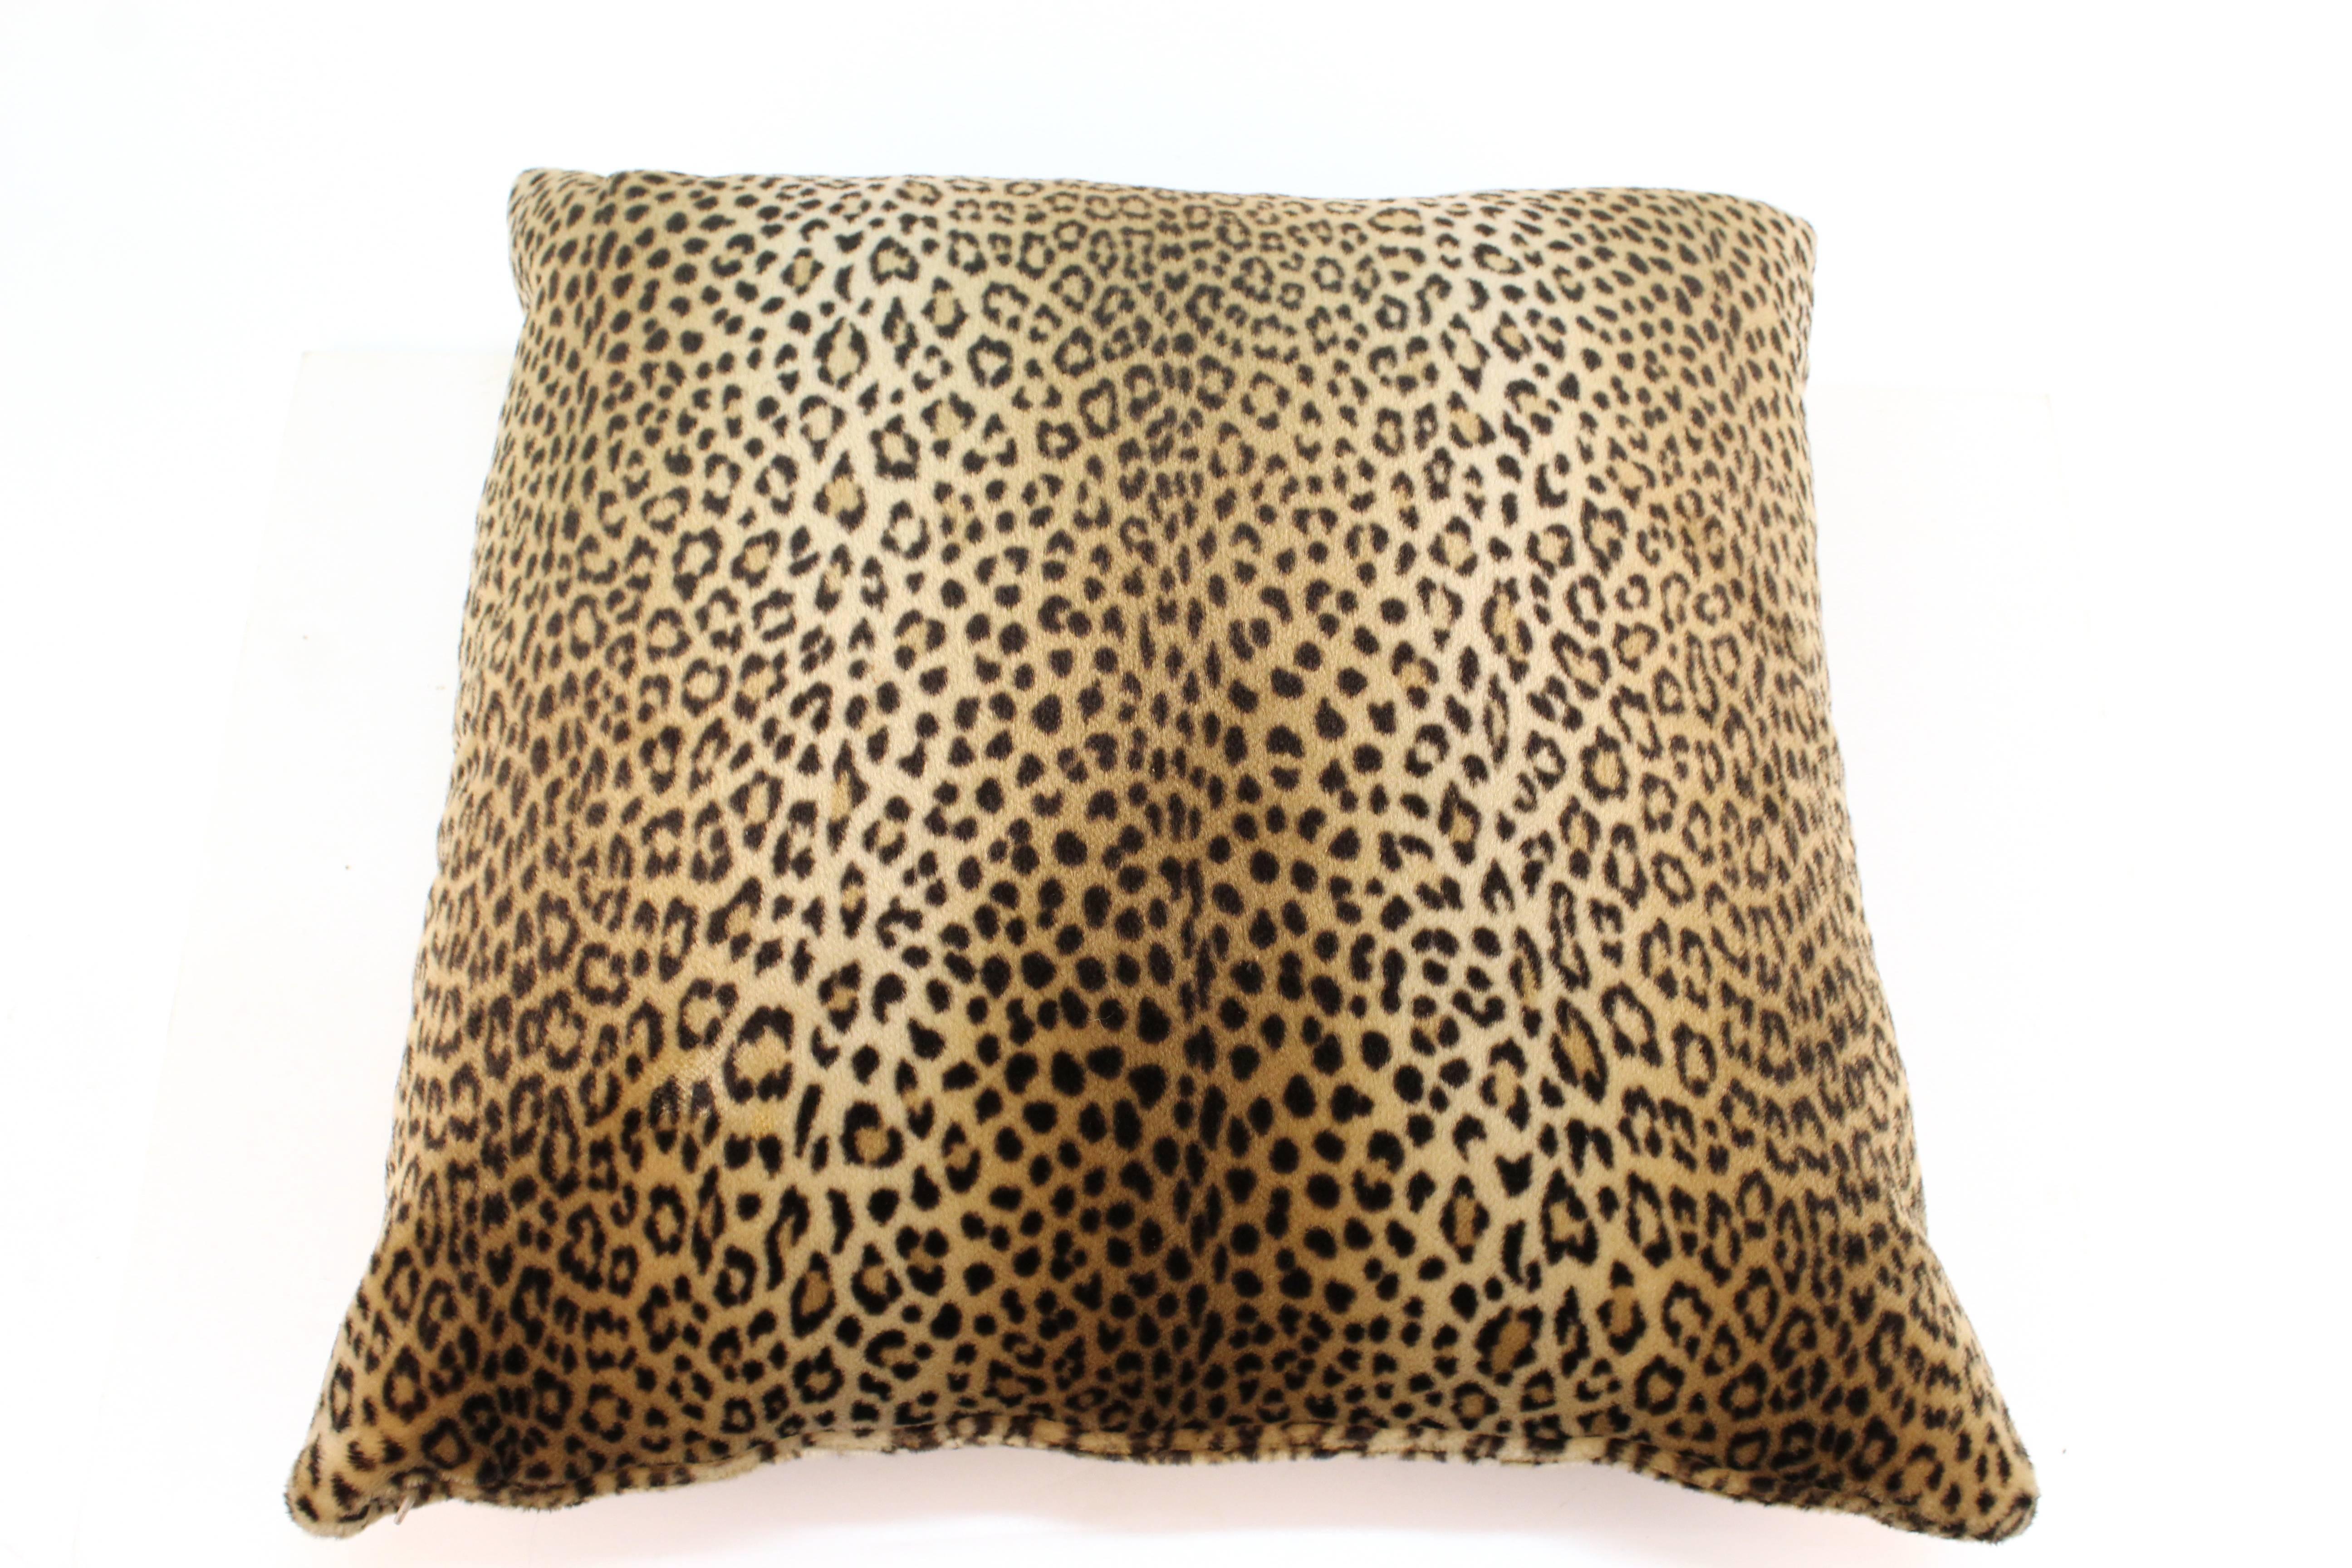 Four large pillows in a synthetic textile with leopard print pattern. In excellent vintage condition consistent with age and use. 111282. 

Available as a set or for $250 each.